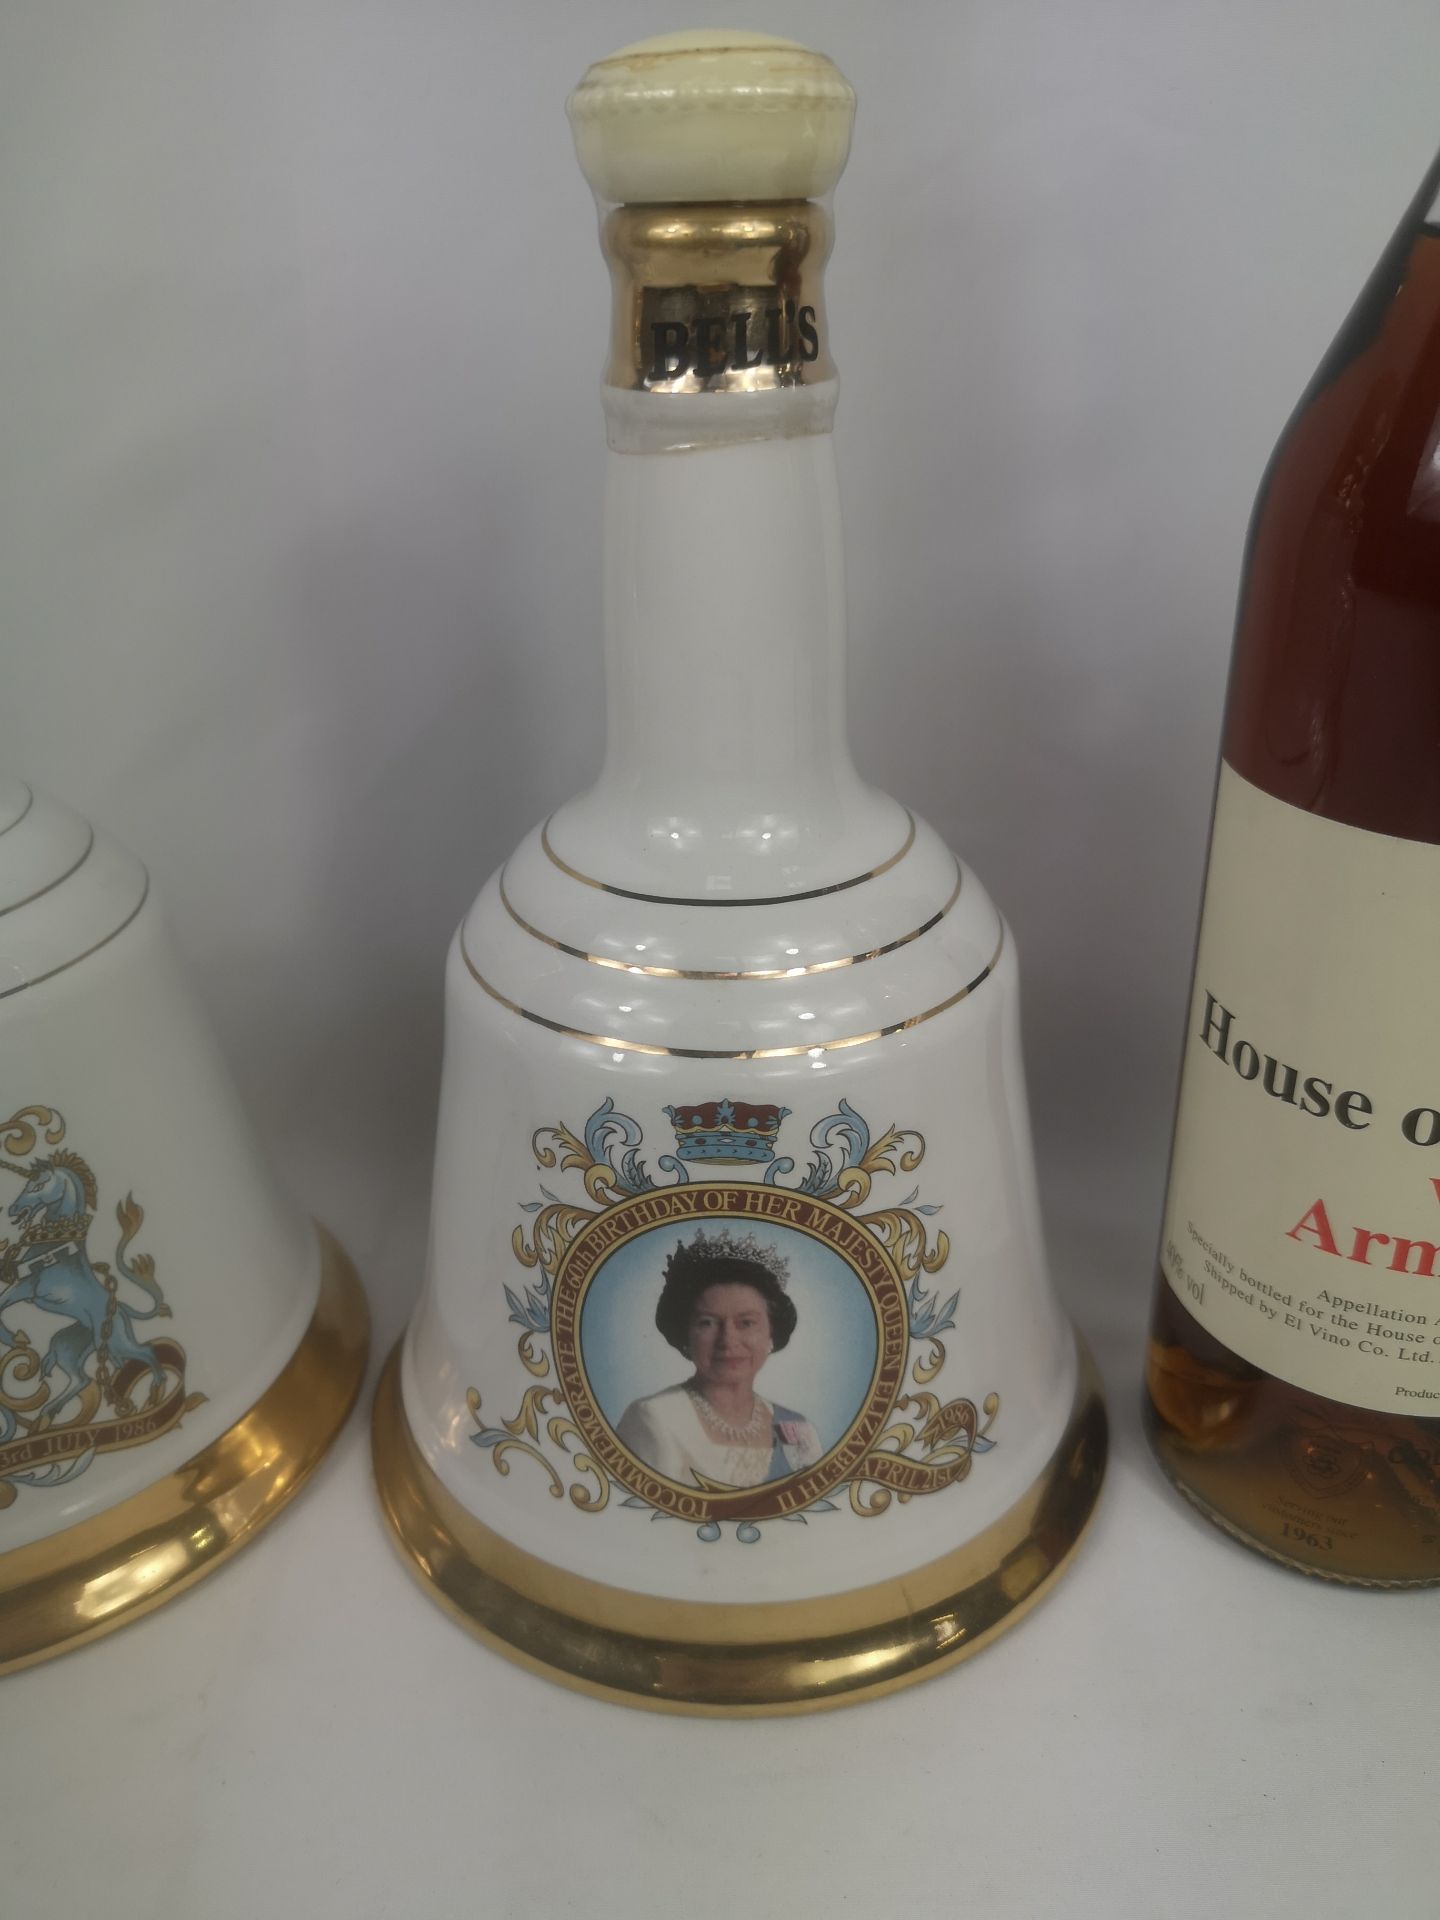 Three Bells porcelain whisky decanters, bottle of House of Commons Armagnac - Image 4 of 6